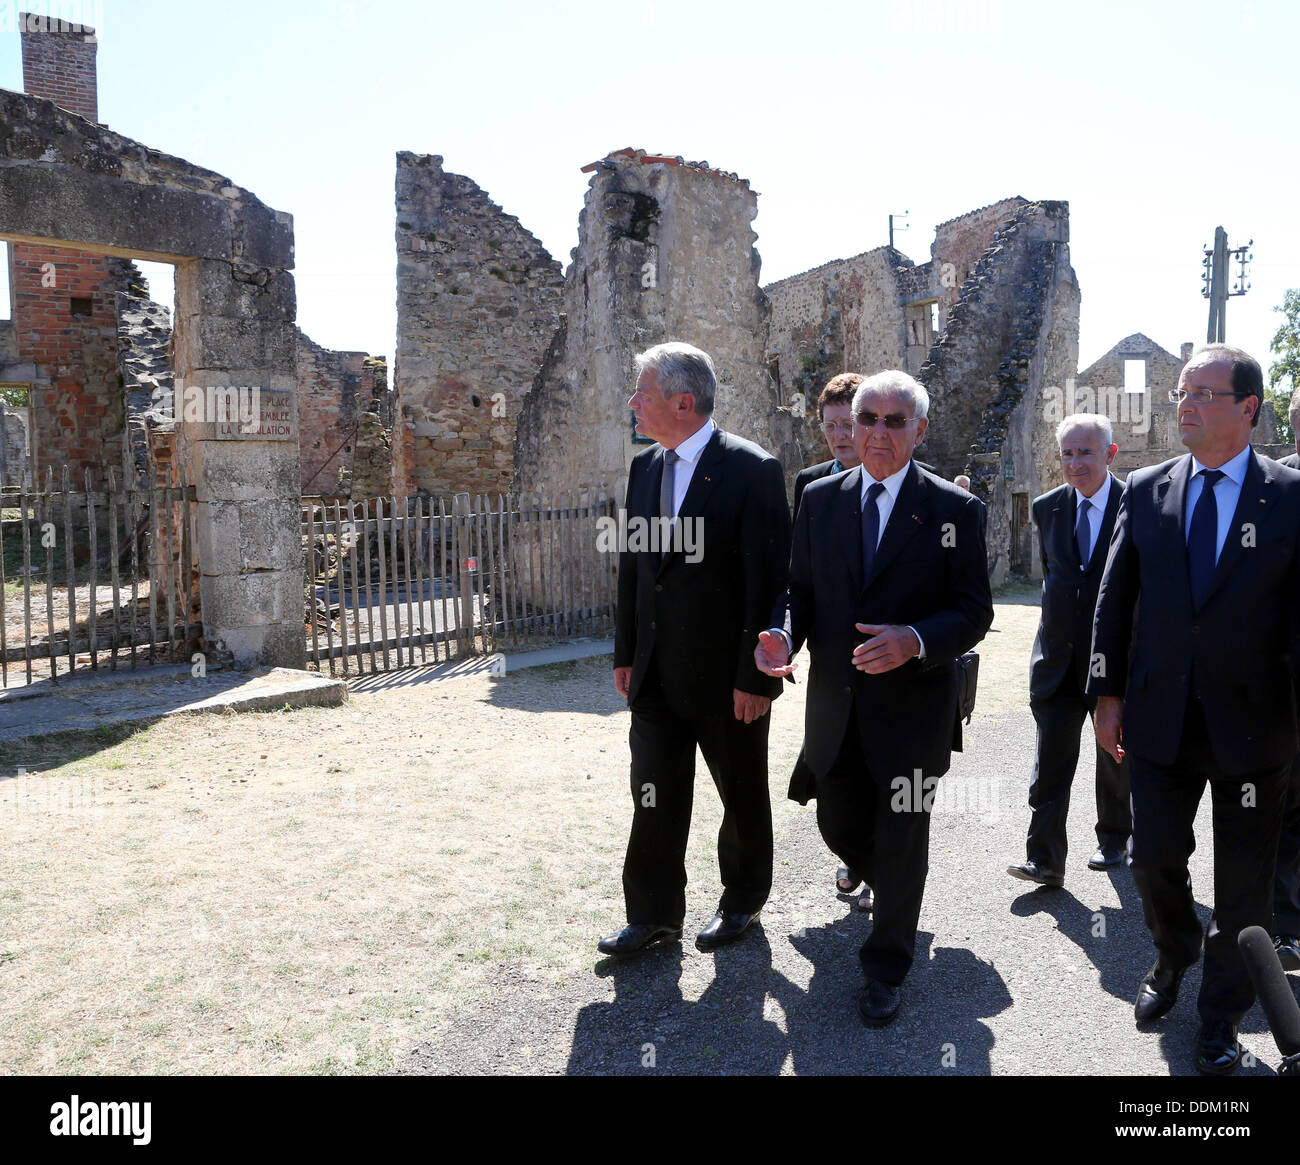 Oradour-sur-Glane, France. 04th Sep, 2013. German President Joachim Gauck (L), French President Francois Hollande and survivor of the massacre in Oradour-sur-Glane during World War II Robert Hebras (2-L) are pictured at the memorial site in Oradour-sur-Glane, France, 04 September 2013. A unit of SS officers murdered 642 citizens of the town in June 1944. The German President is on a three-day visit to France. Photo: WOLFGANG KUMM/dpa/Alamy Live News Stock Photo